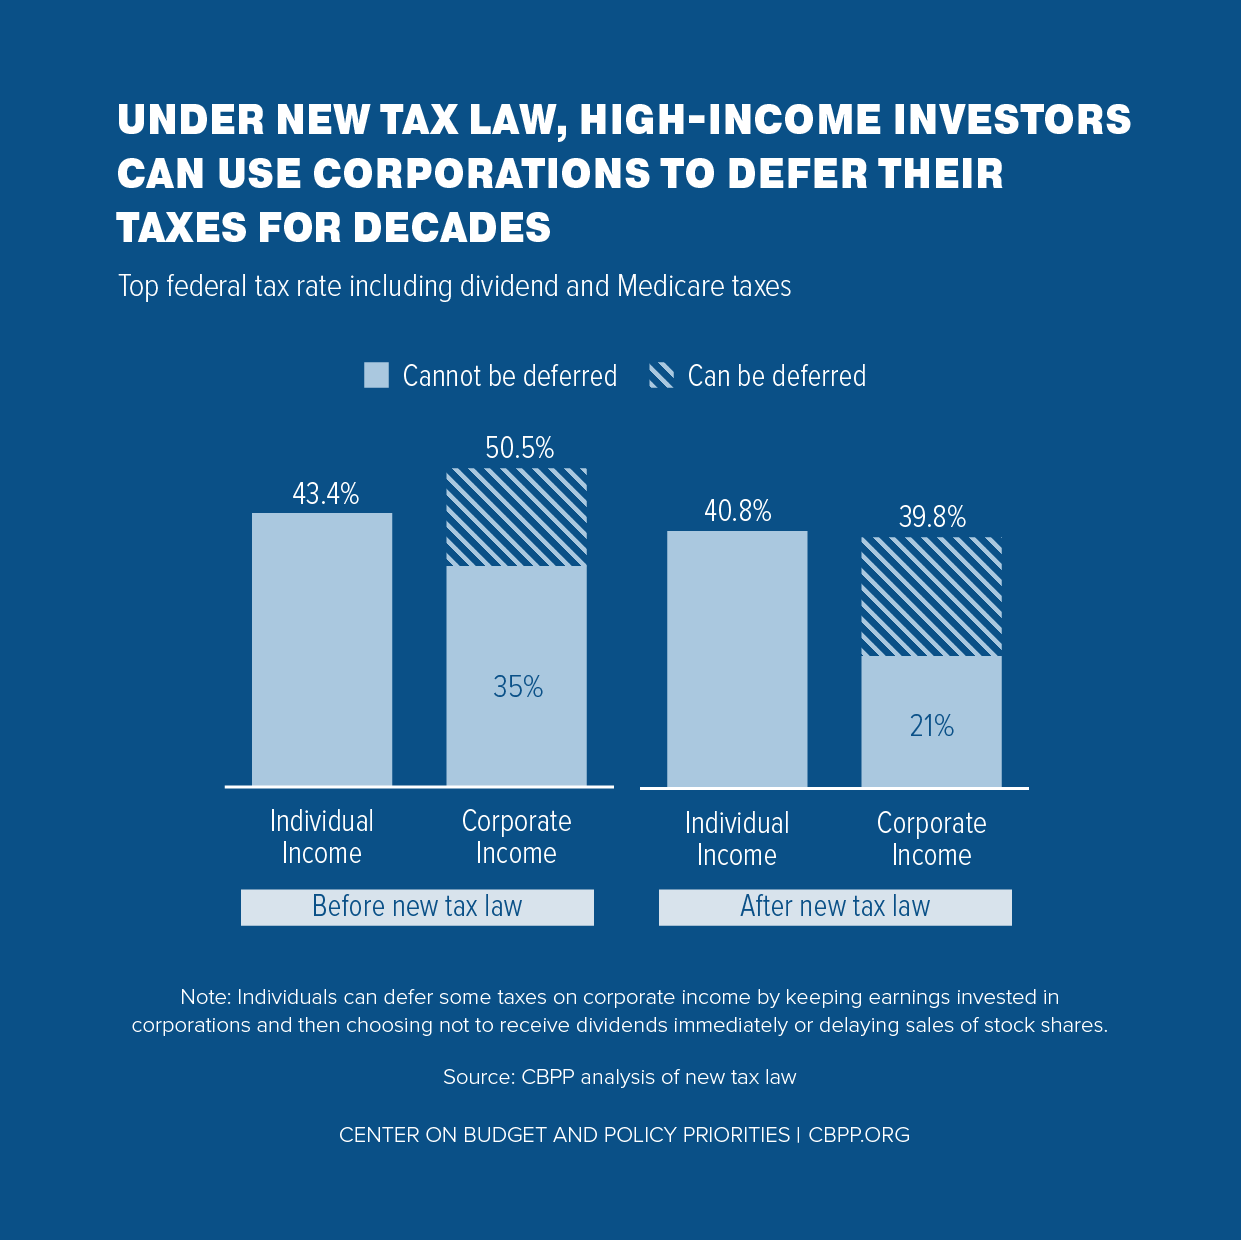 Under New Tax Law, High-Income Investors Can Use Corporations to Defer Their Taxes for Decades